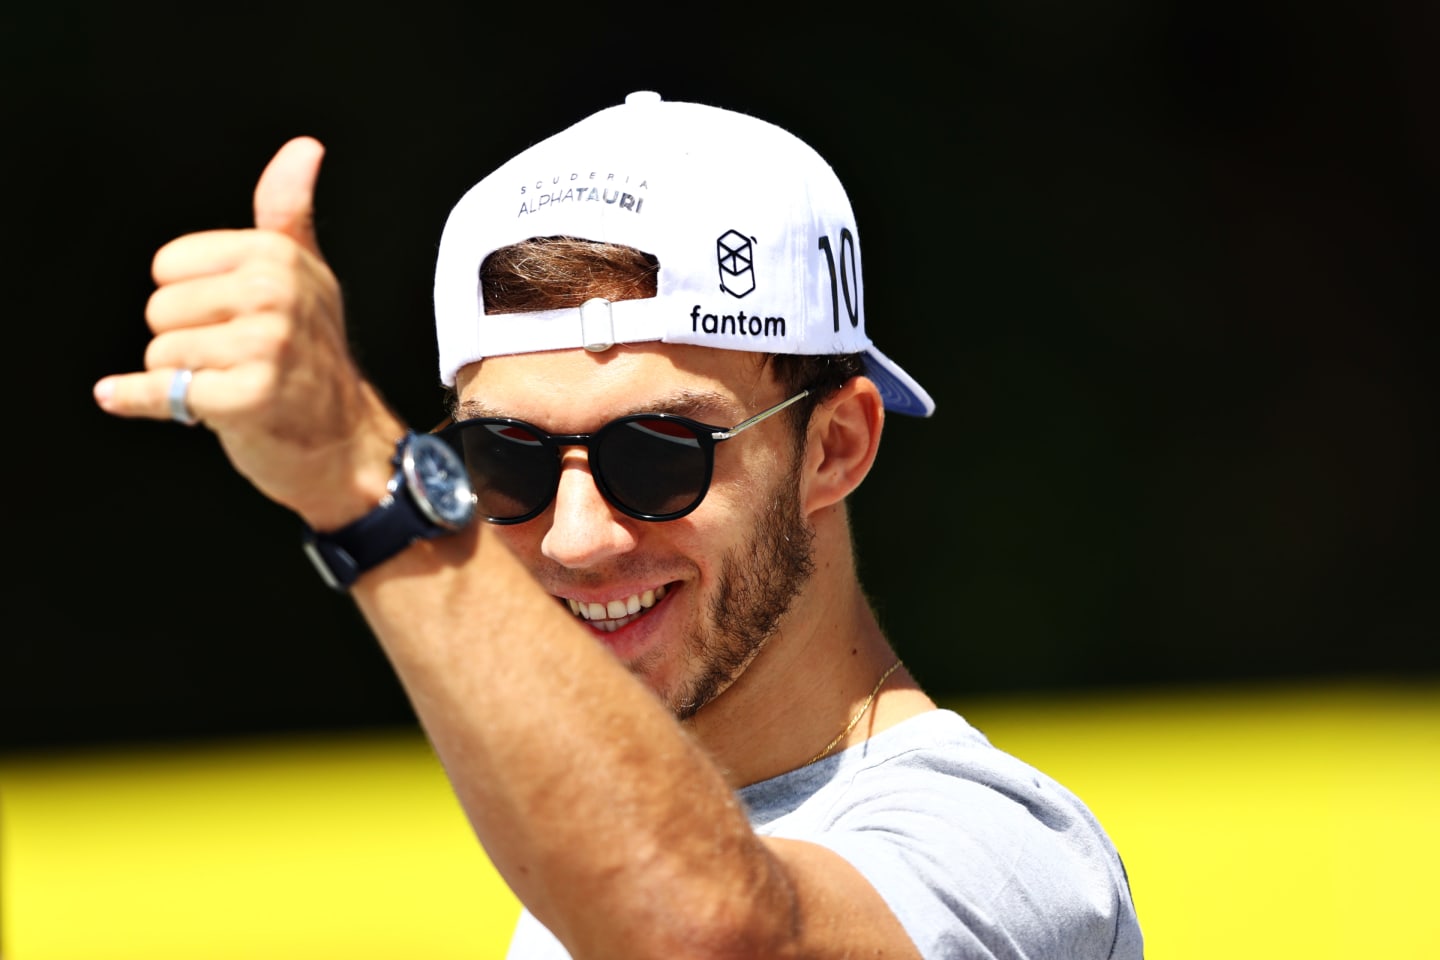 SPIELBERG, AUSTRIA - JUNE 24: Pierre Gasly of France and Scuderia AlphaTauri waves to the crowd on